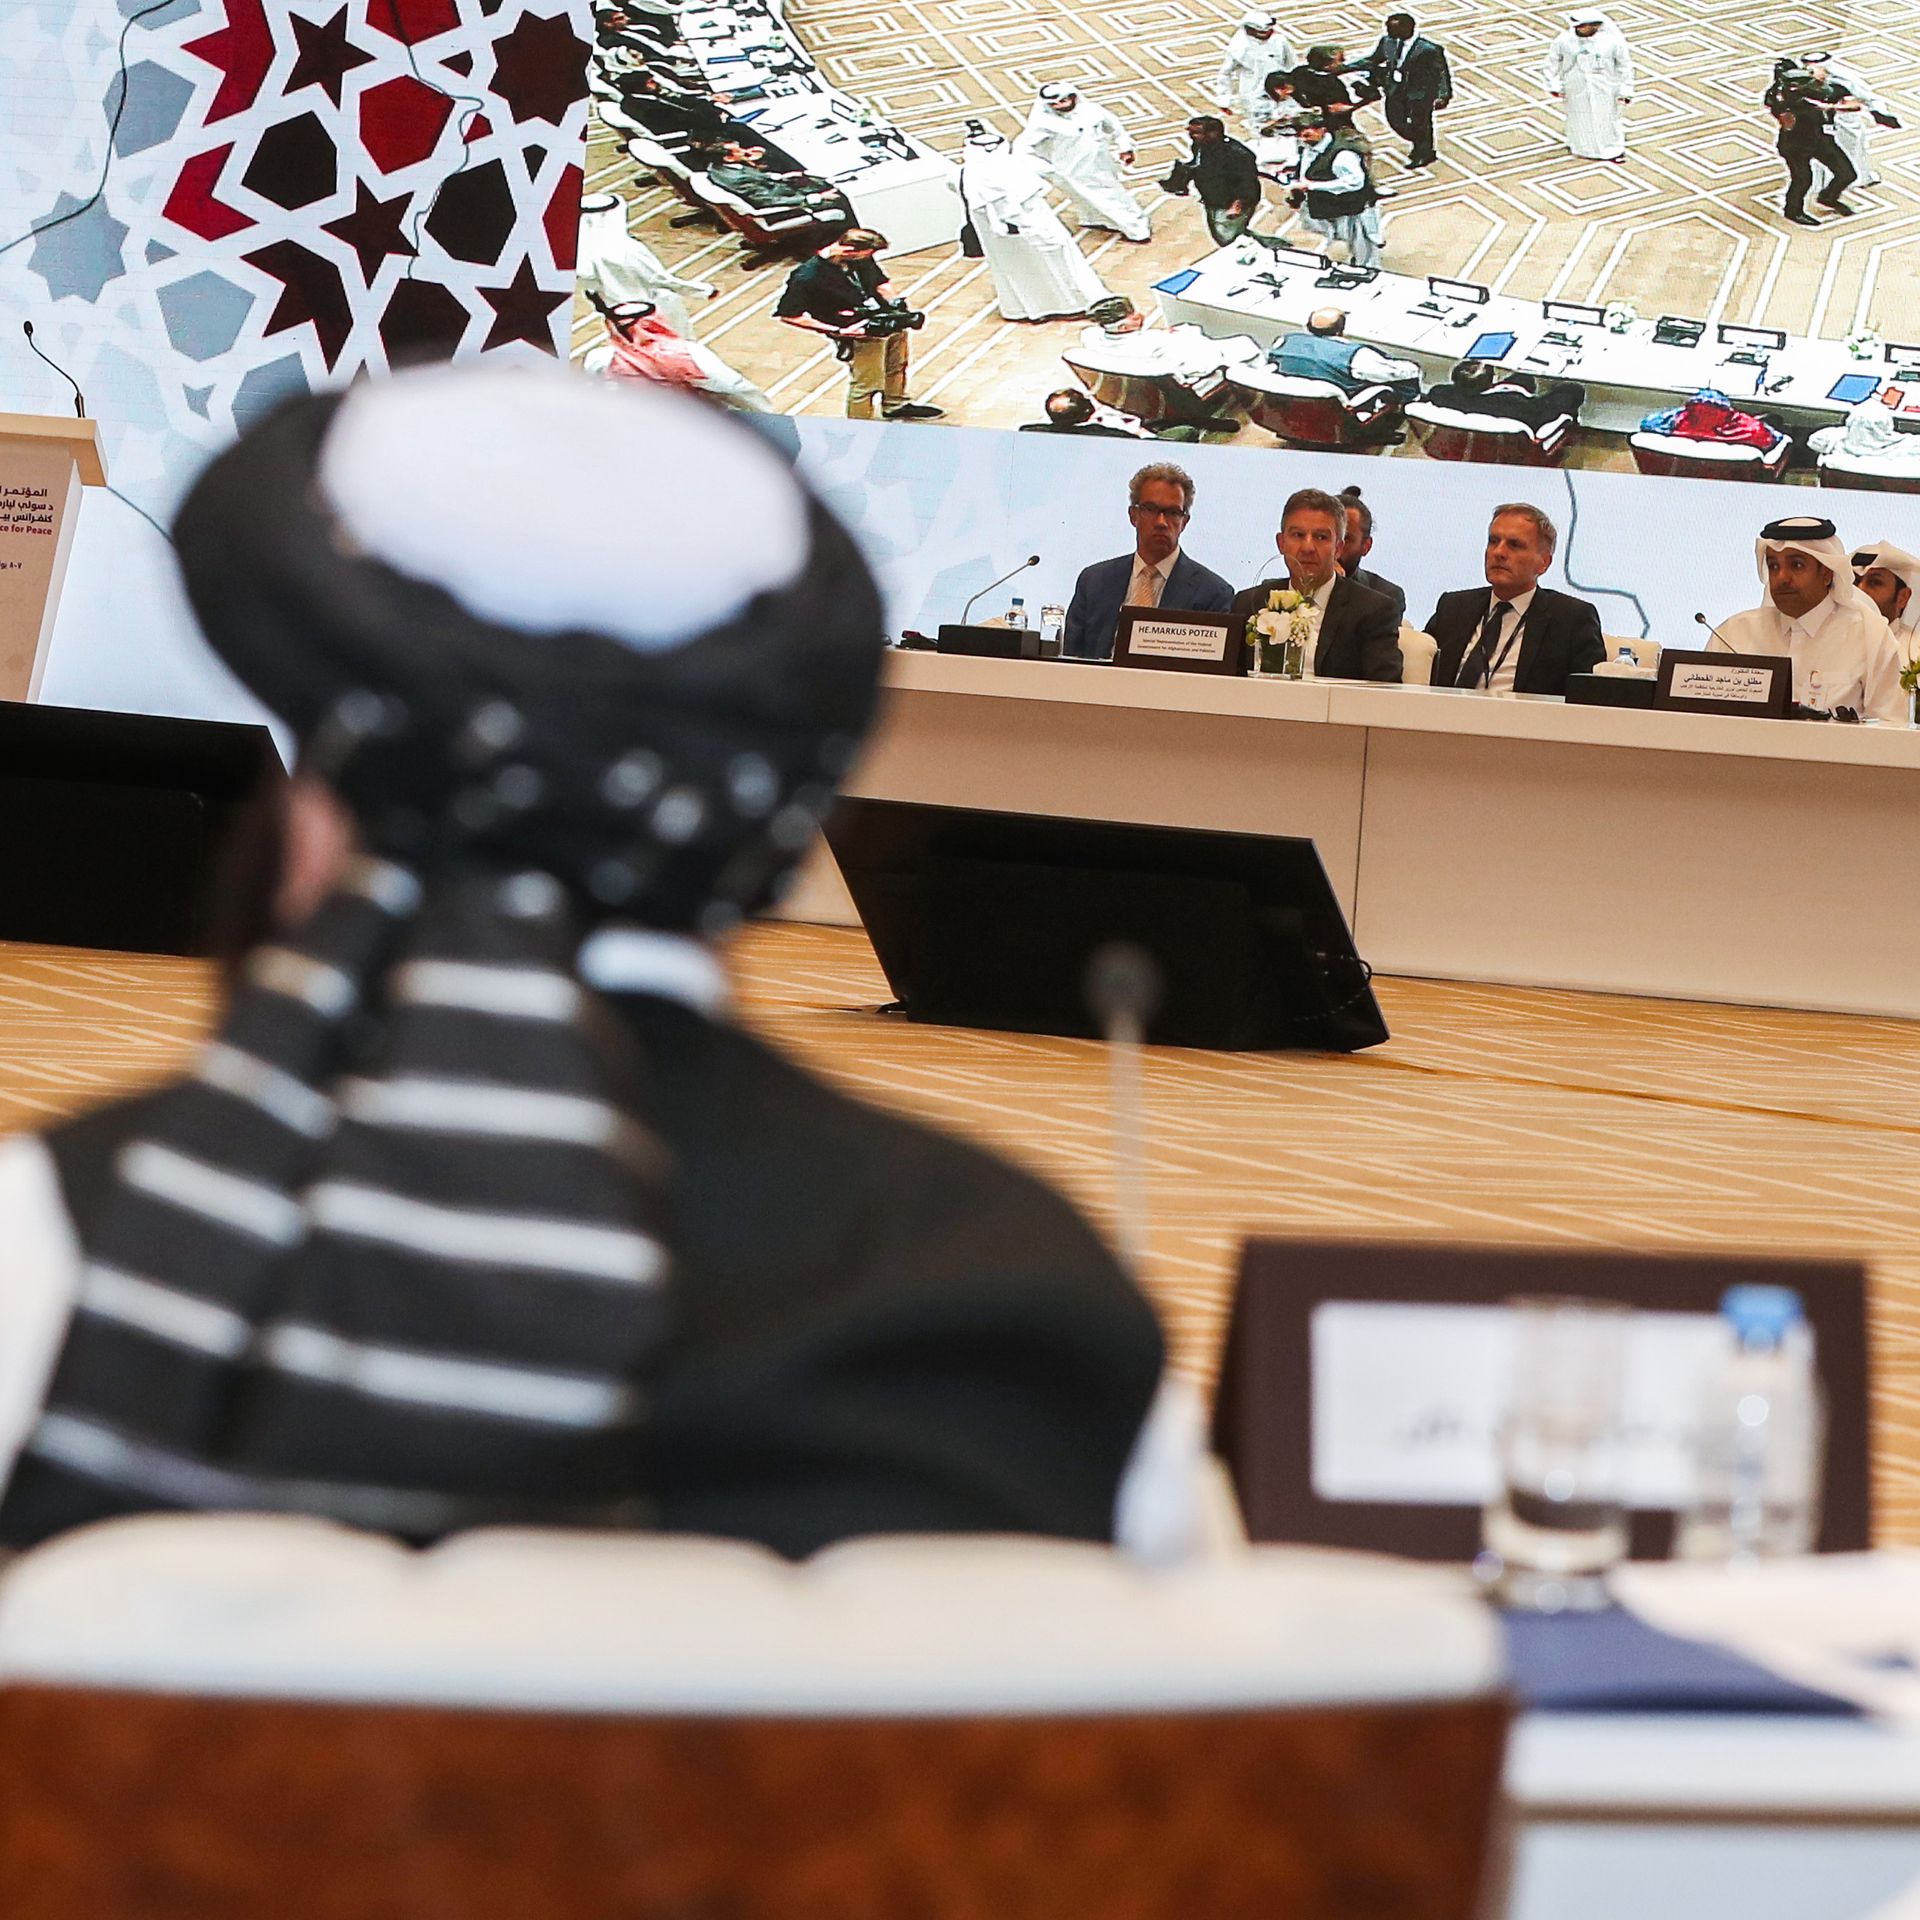 inside the meeting room of the intra Afghan talks in Doha on July 7–8